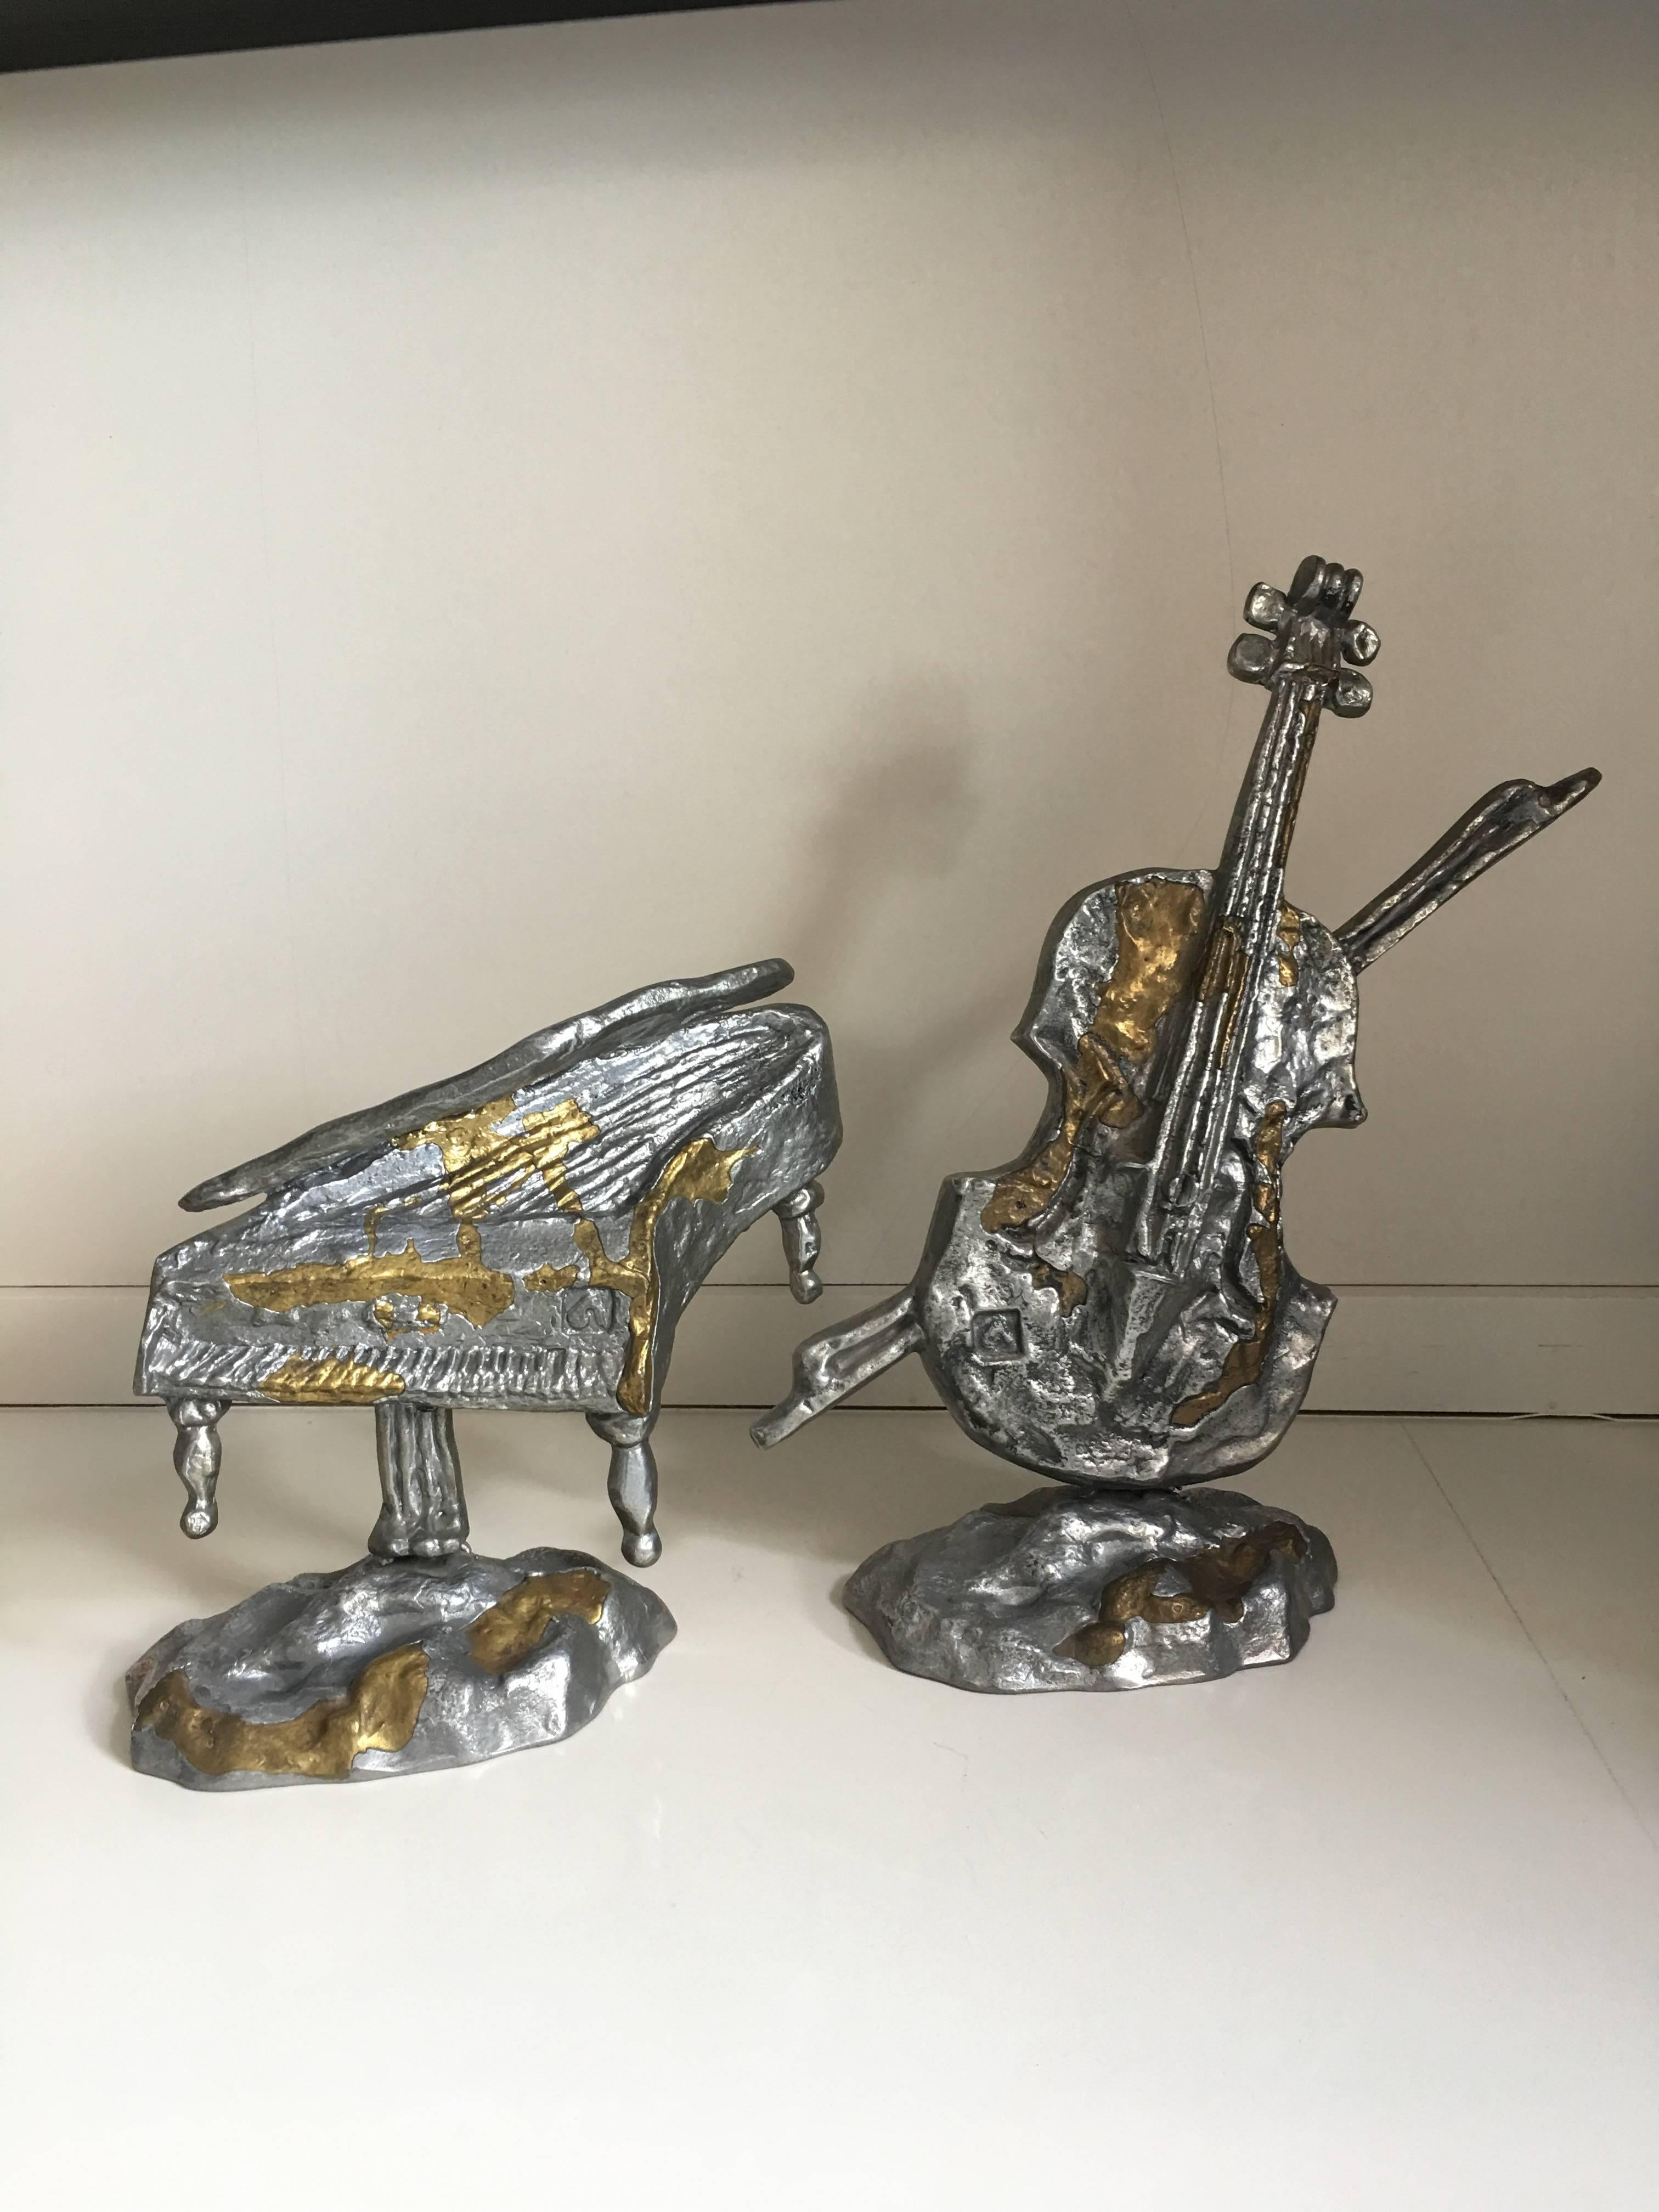 Metal 1960s Piano Sculpture Signed